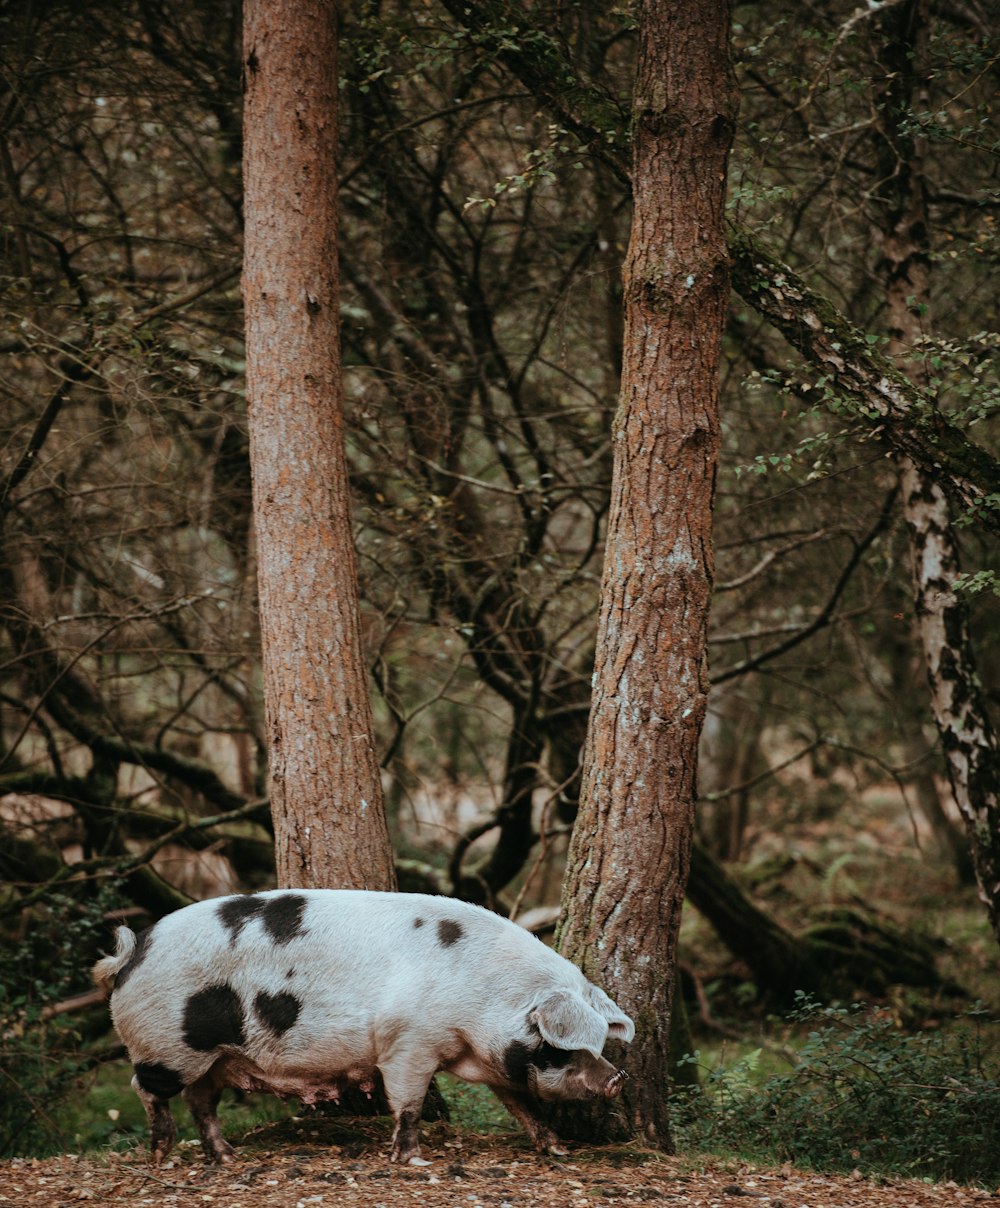 white and black pig standing near trees